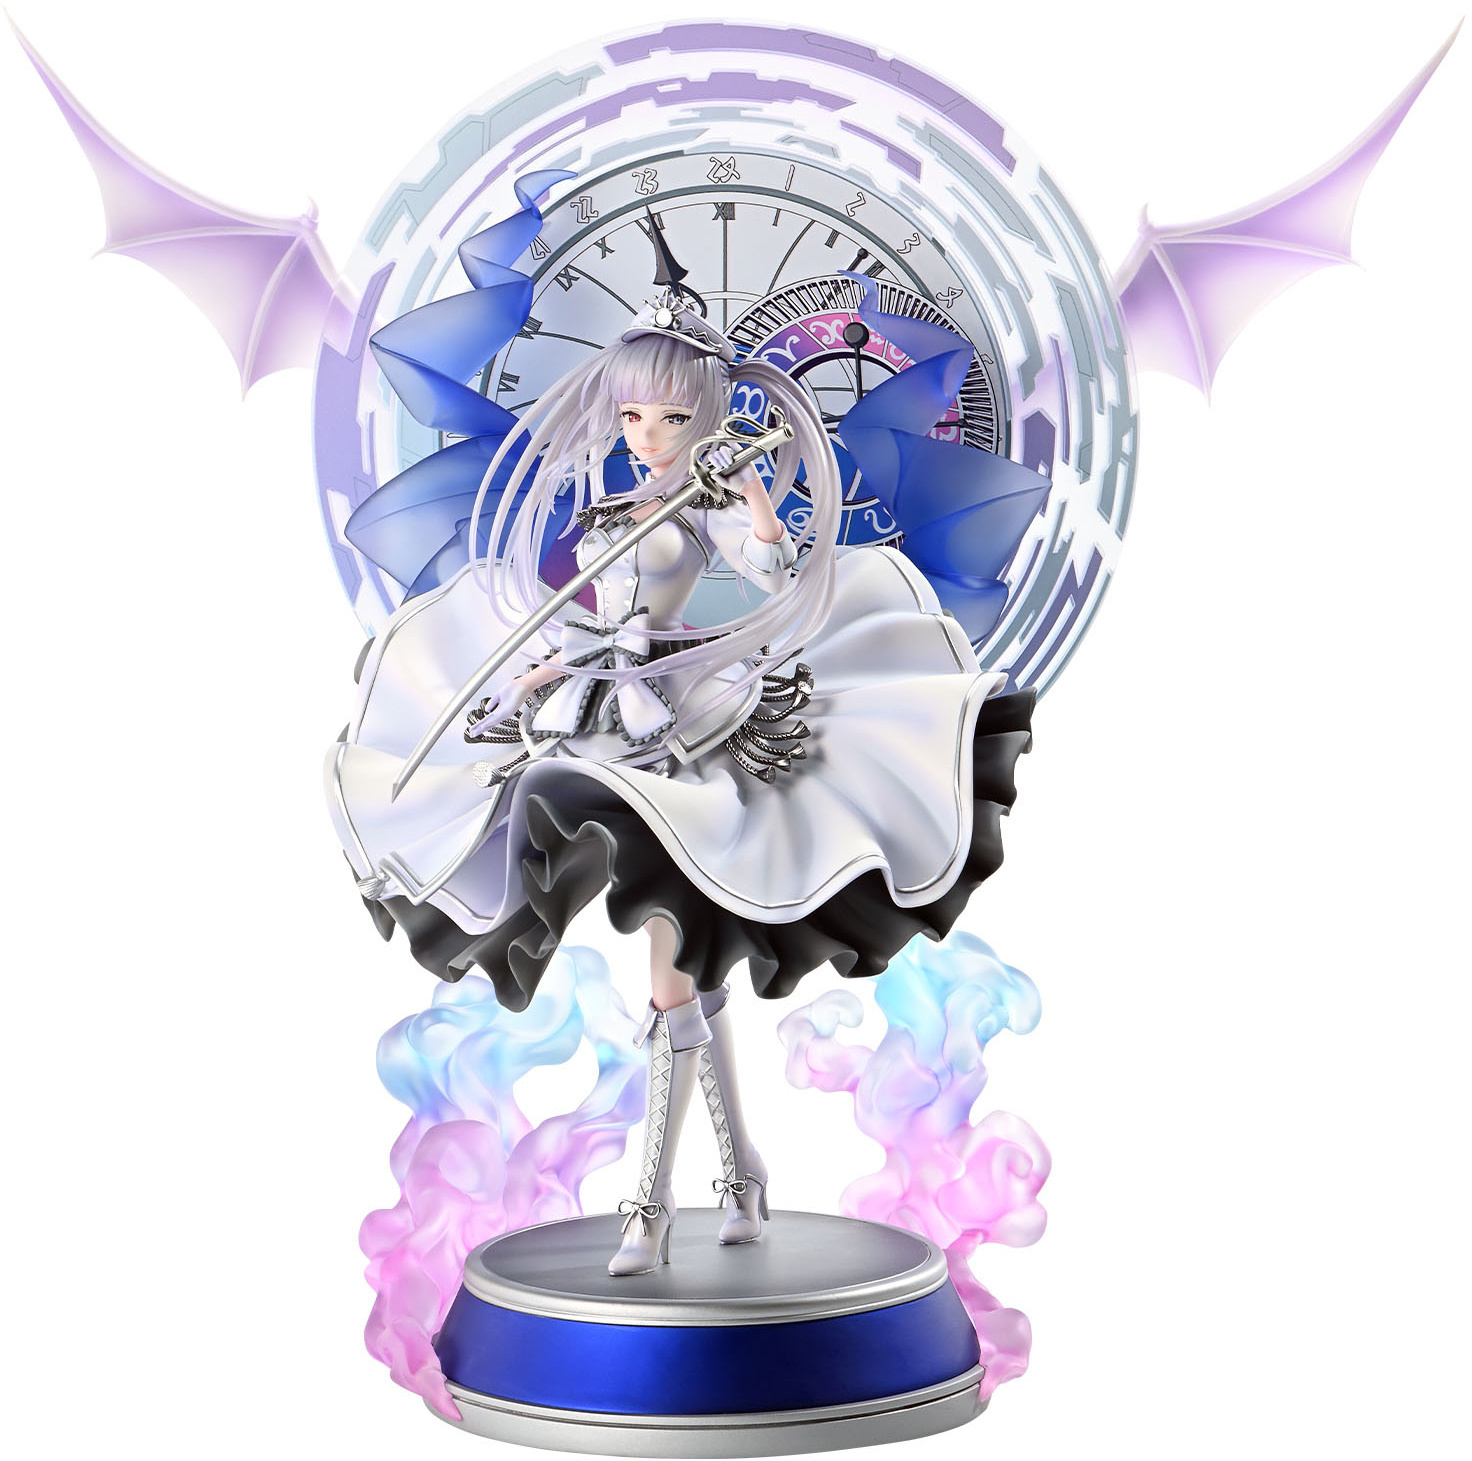 [Pre-order] PRISMA WING "Date A Bullet" White Queen DX Edition - 1/7 Scale Figure